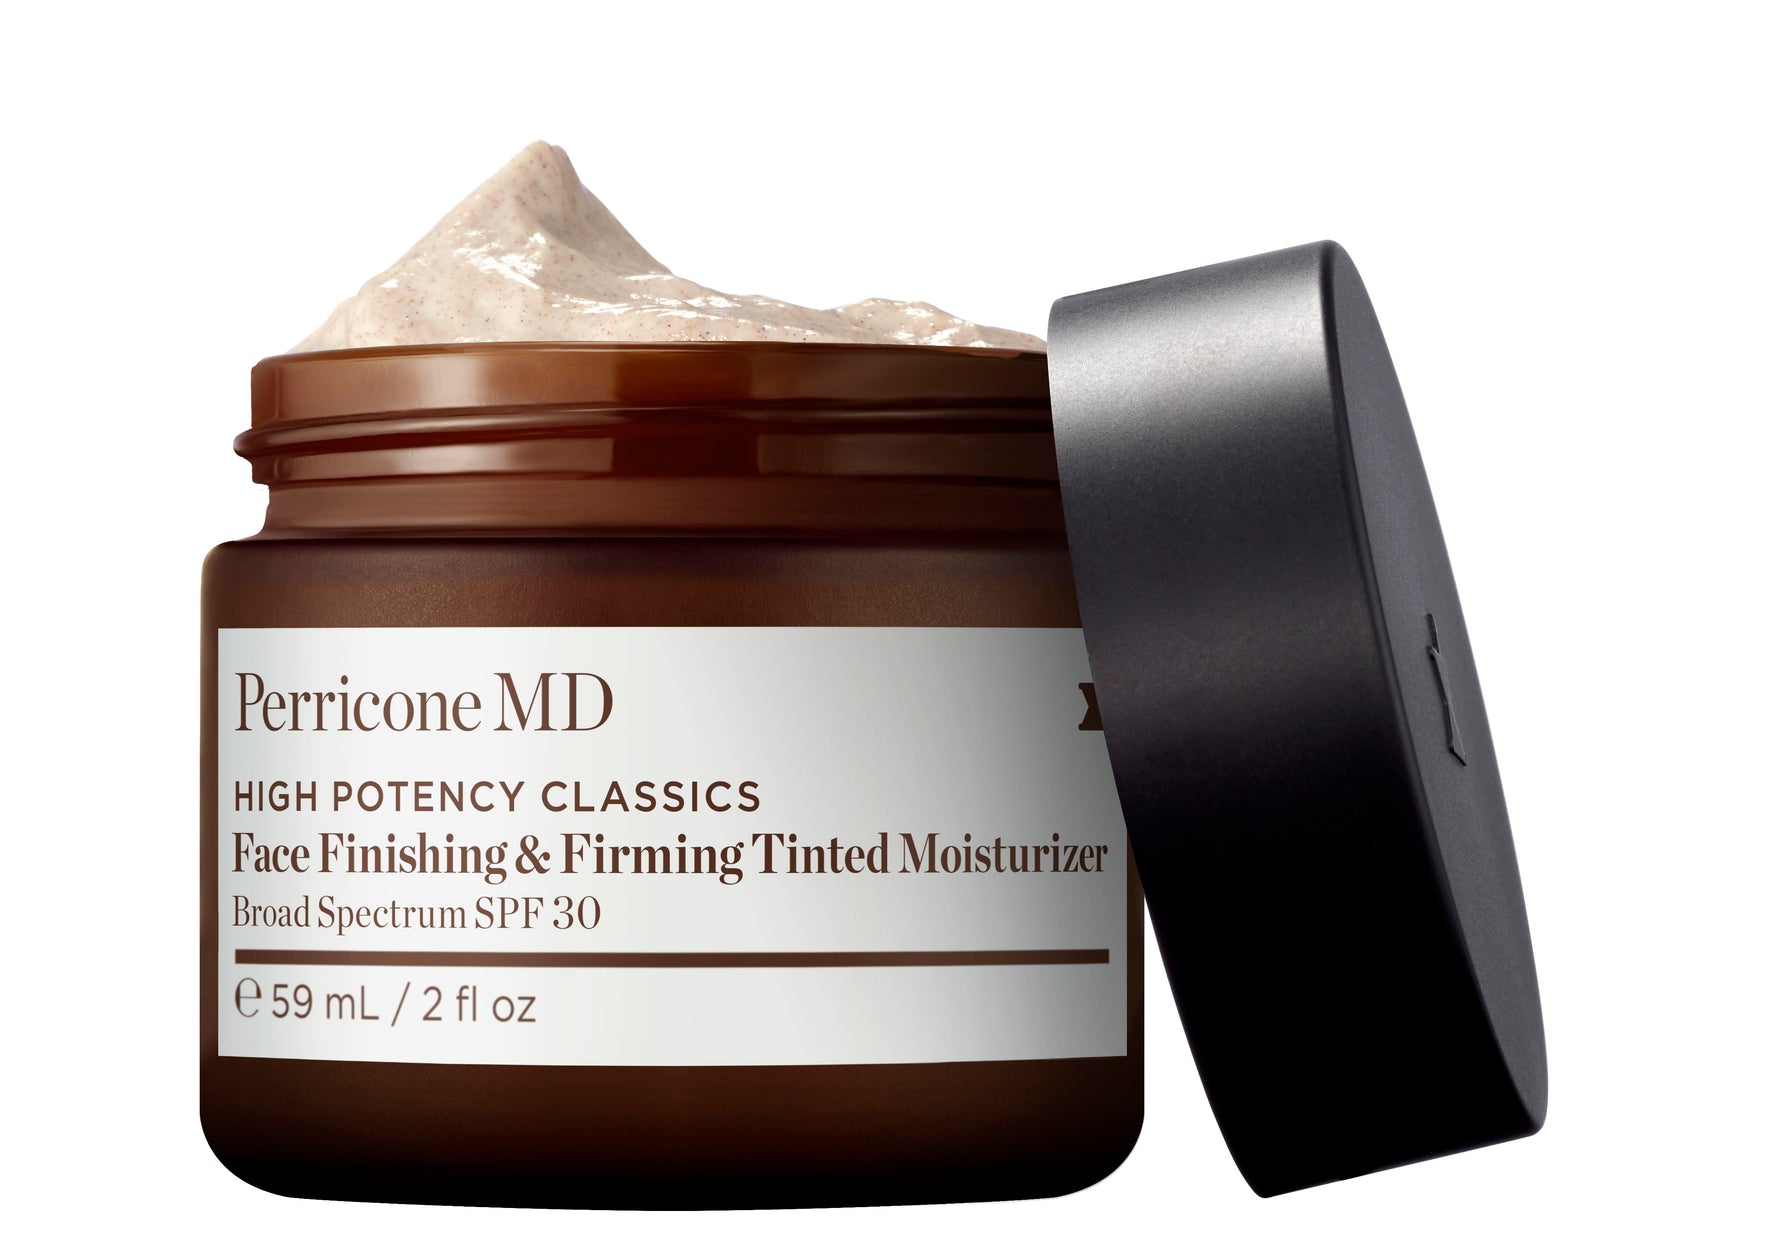 Perricone MD High Potency Classics Face Finishing & Firming Tinted Moisturizer Broad Spectrum SPF 30 (59ml)